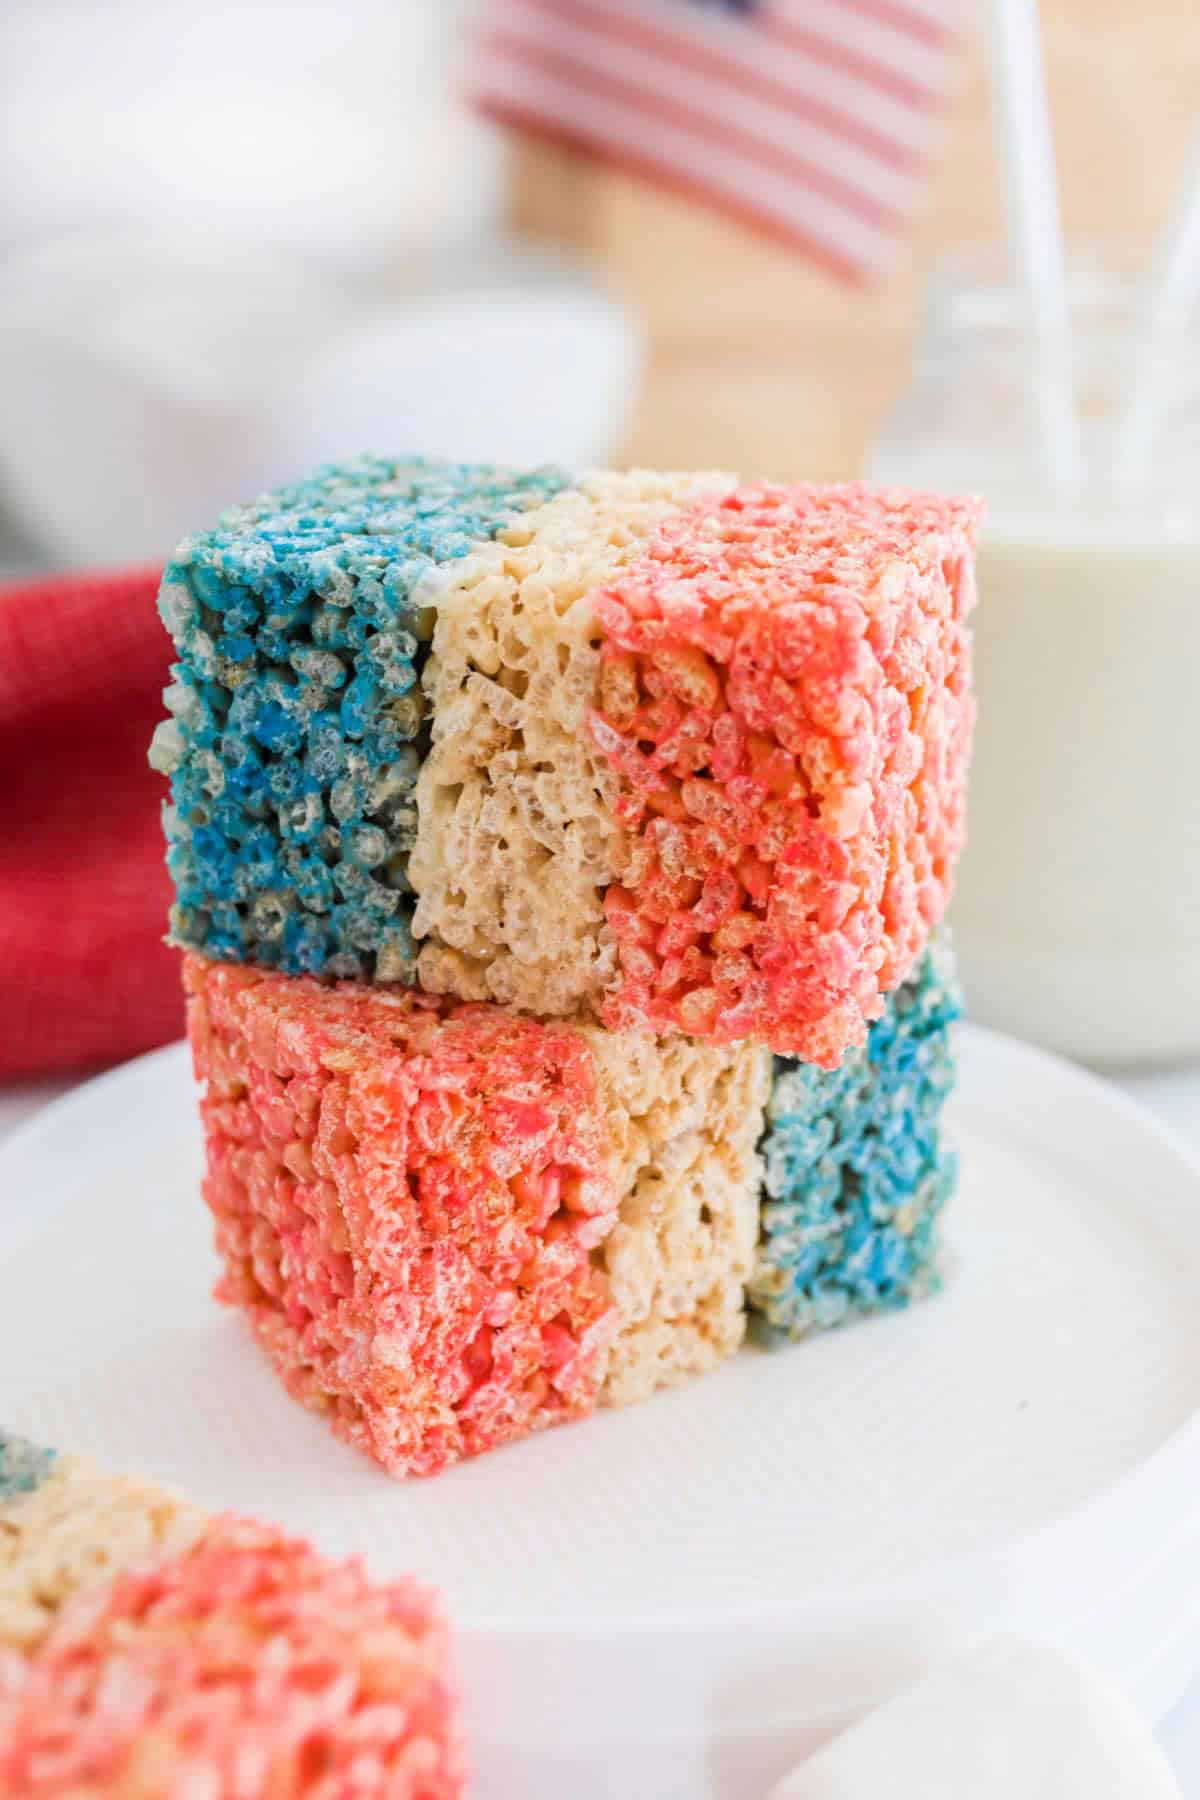 red, white, blue rice krispie treats stacked on top of each other.